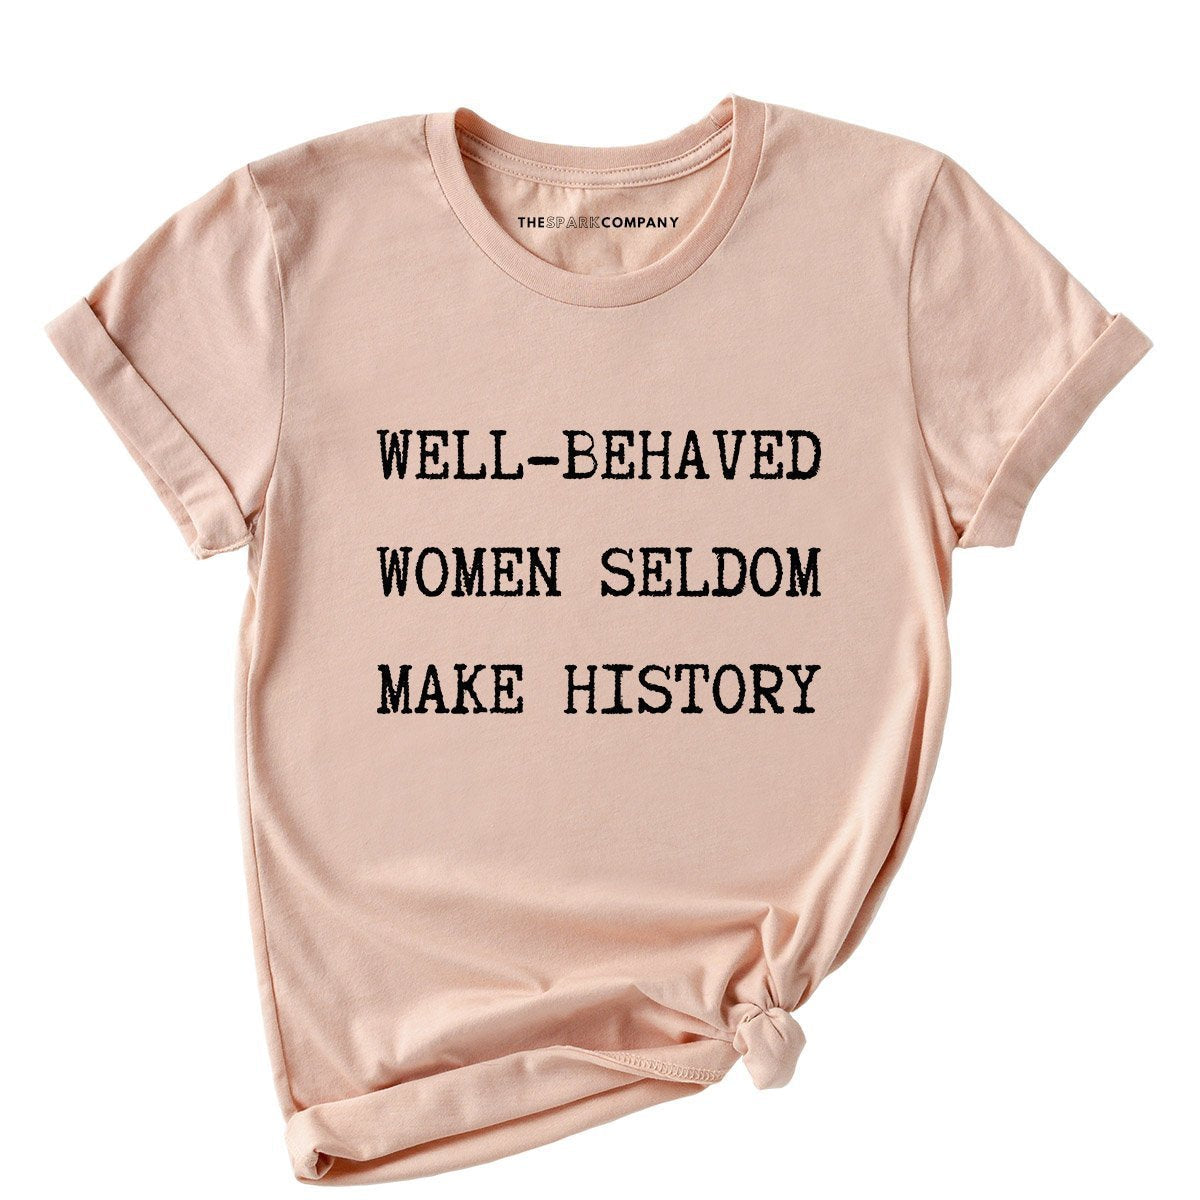 Well Behaved Women Seldom Make History T Shirt The Spark Company 6578